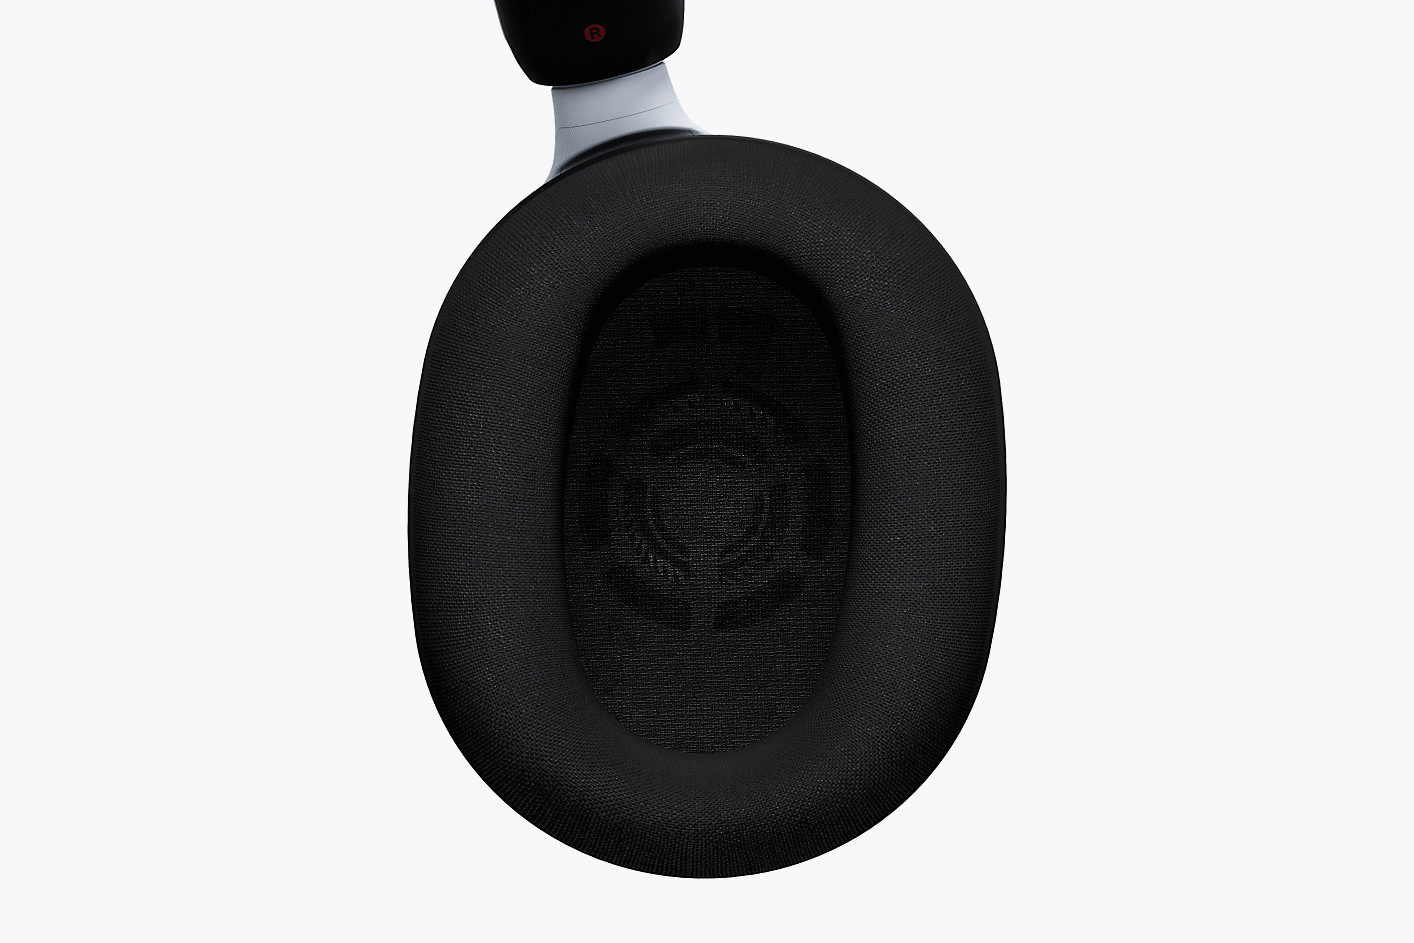 Image of the internal ear cup, showing the comfortable padding